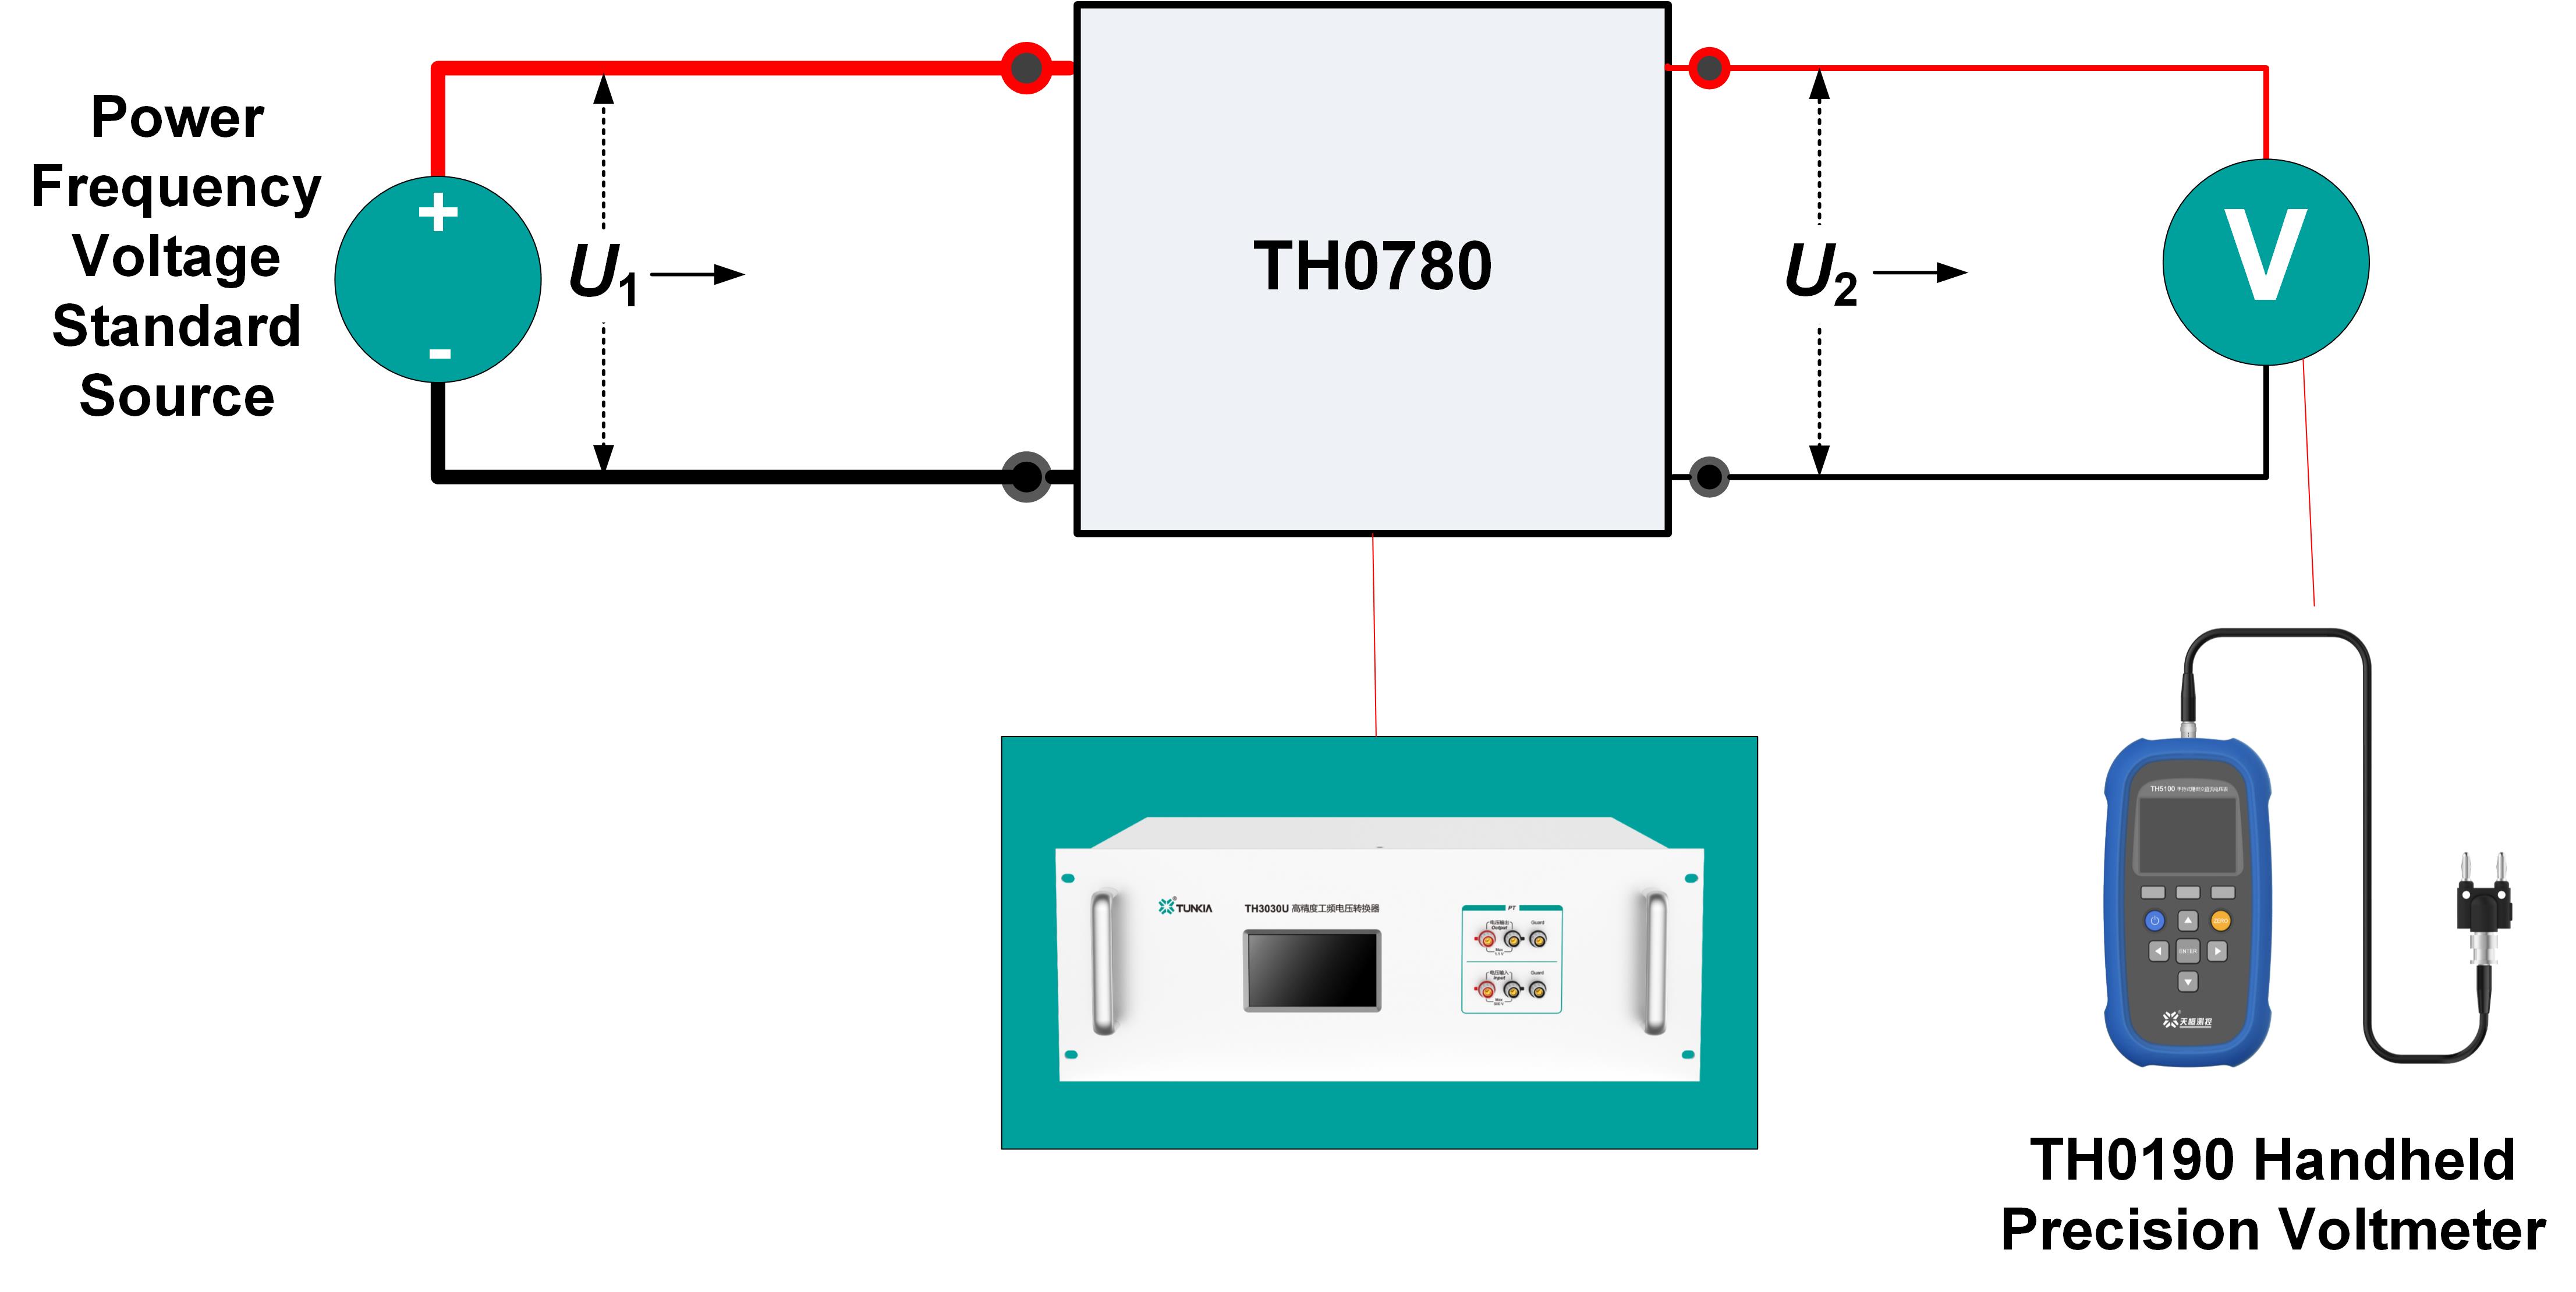 TH0780 Multiplexing VV Selection Units Measure power frequency voltage